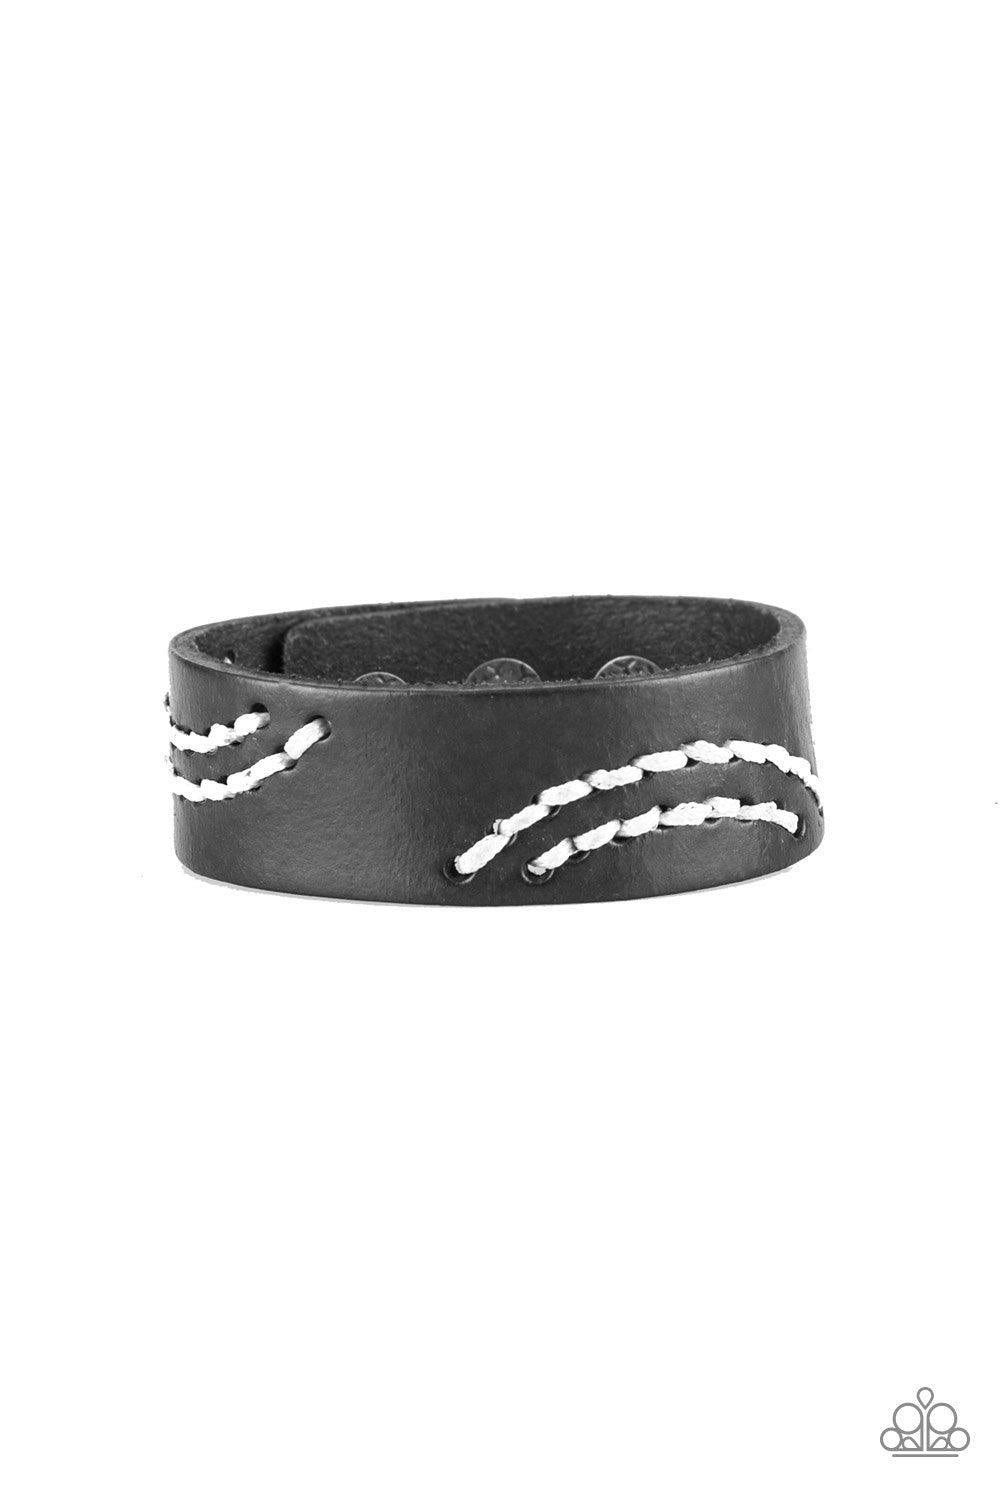 Paparazzi Accessories Rural Roamer - Black Sections of white cording is stitched across the front of a black leather band for a whimsical look. Features an adjustable snap closure. Jewelry